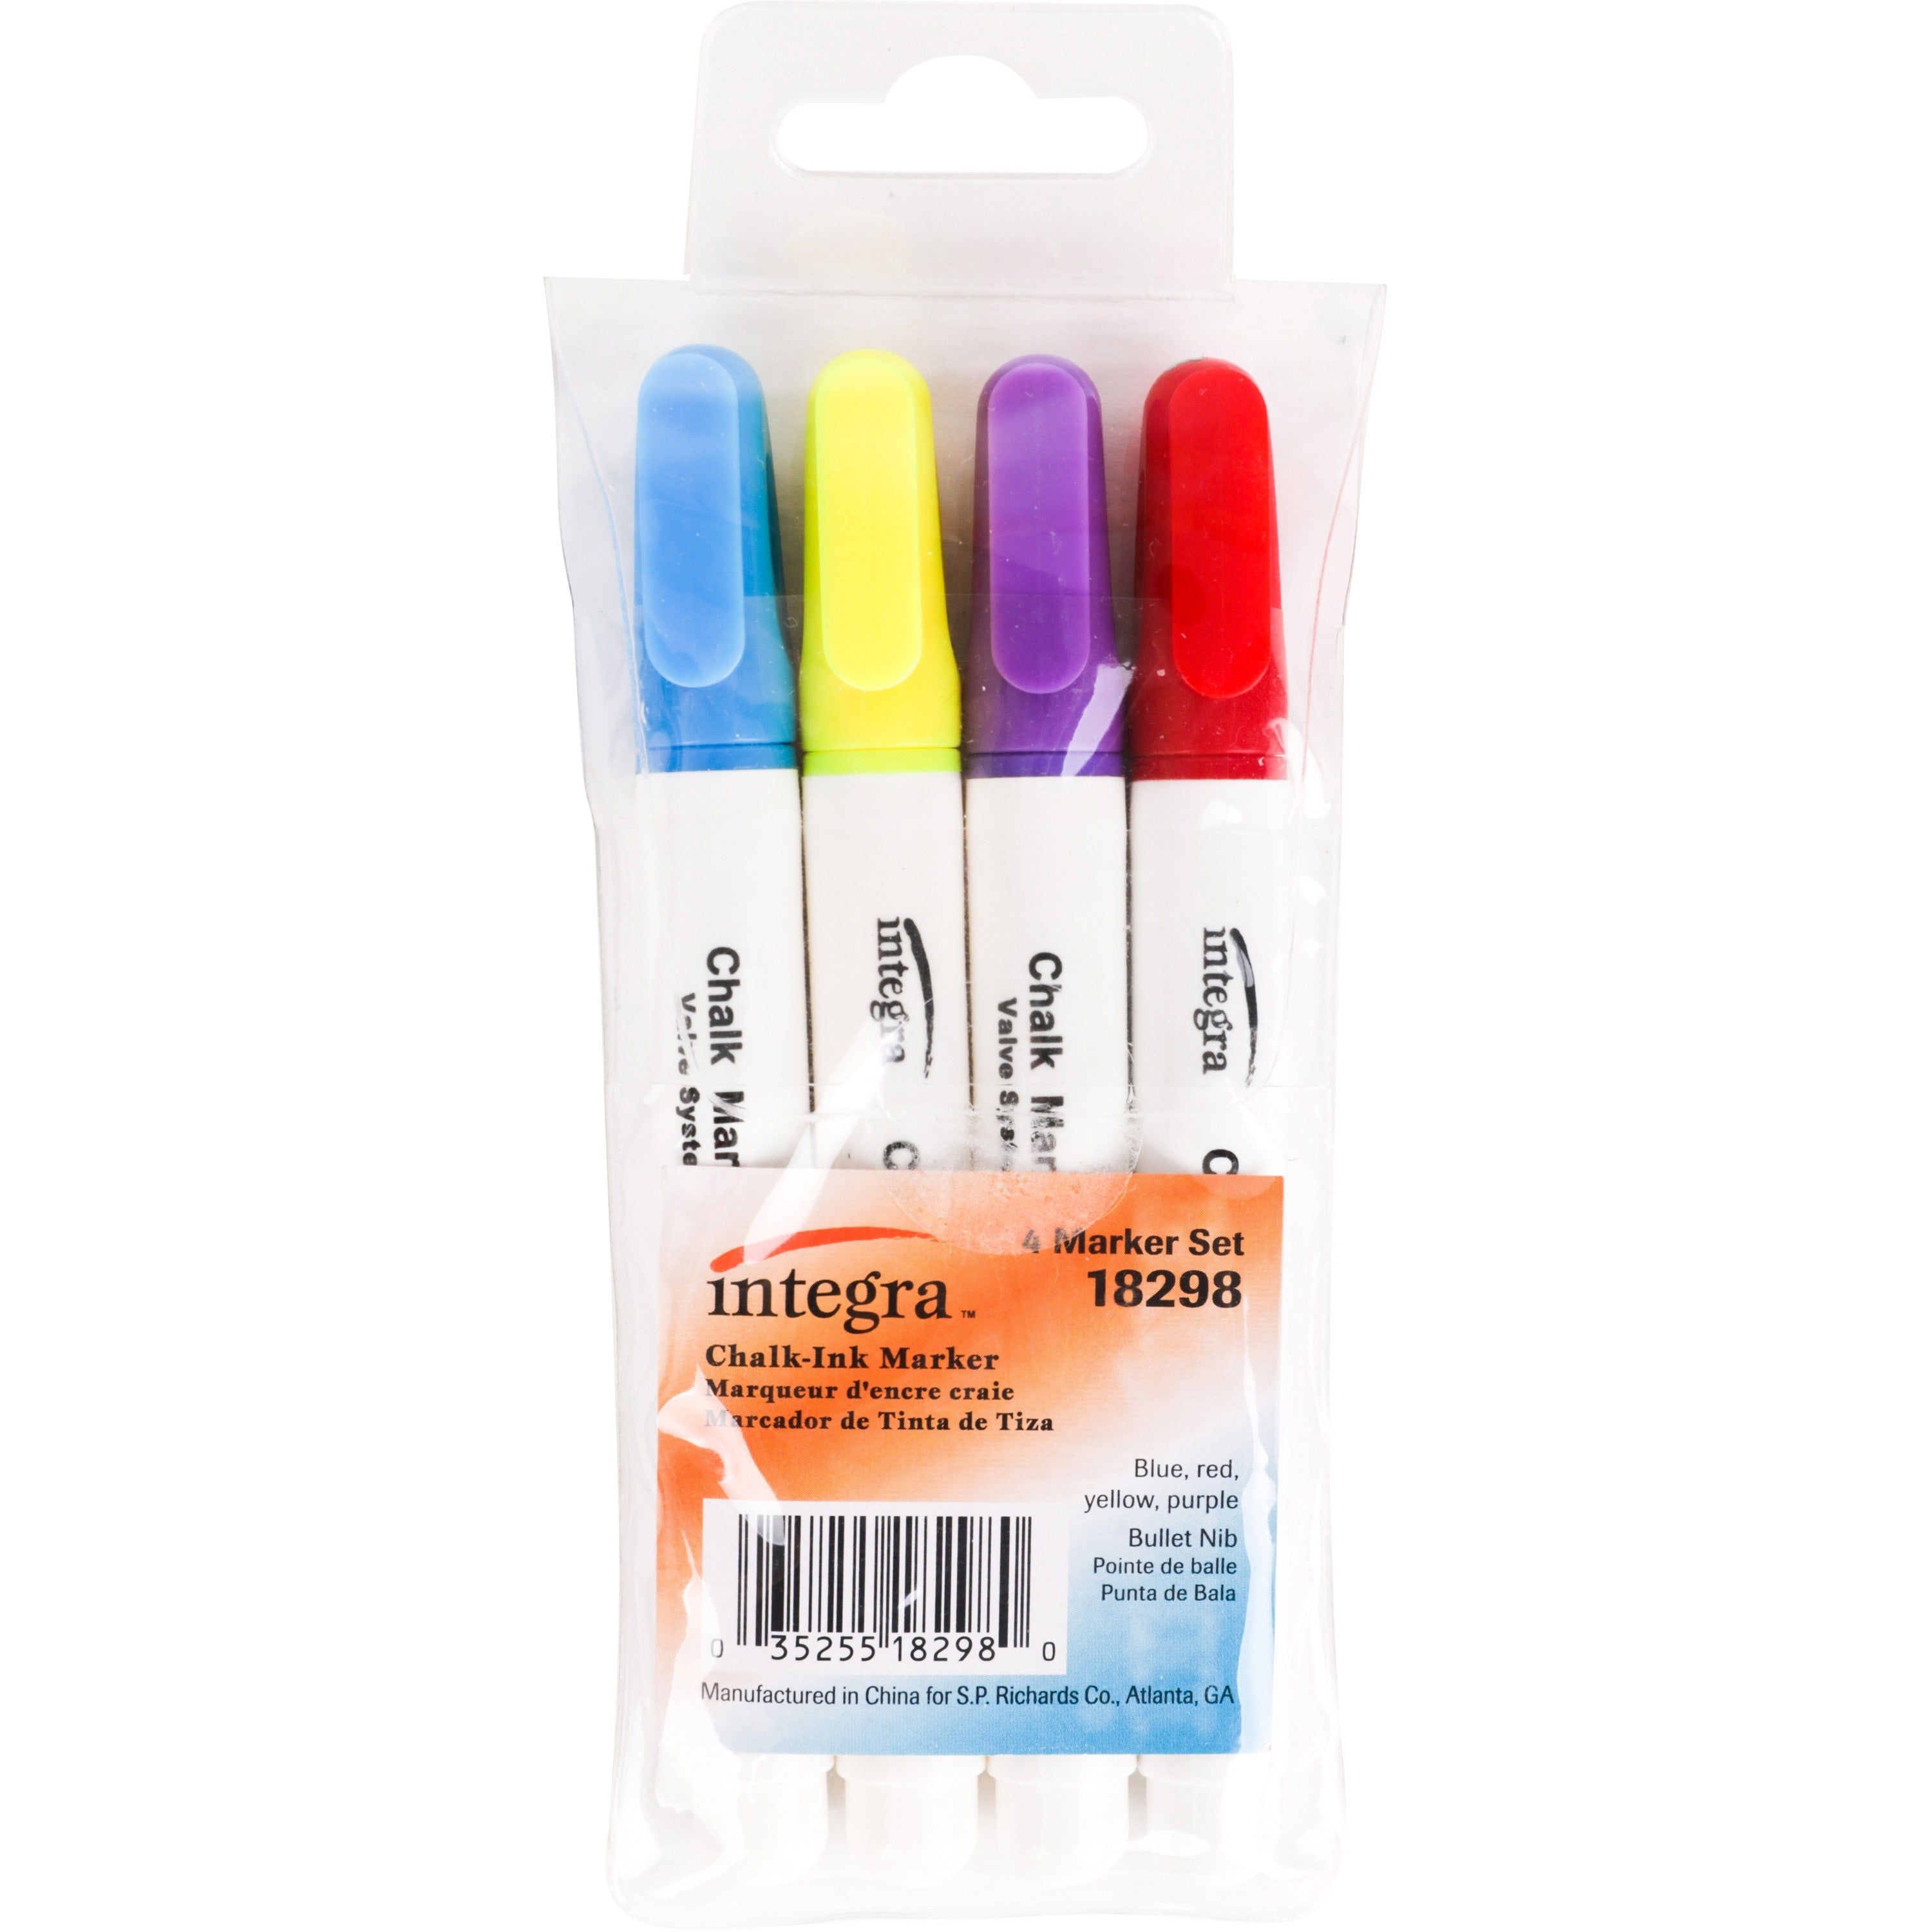 integra-chalk-ink-markers-bullet-marker-point-style-blue-purple-red-yellow-chalk-based-ink-4-set_ita18298 - 1